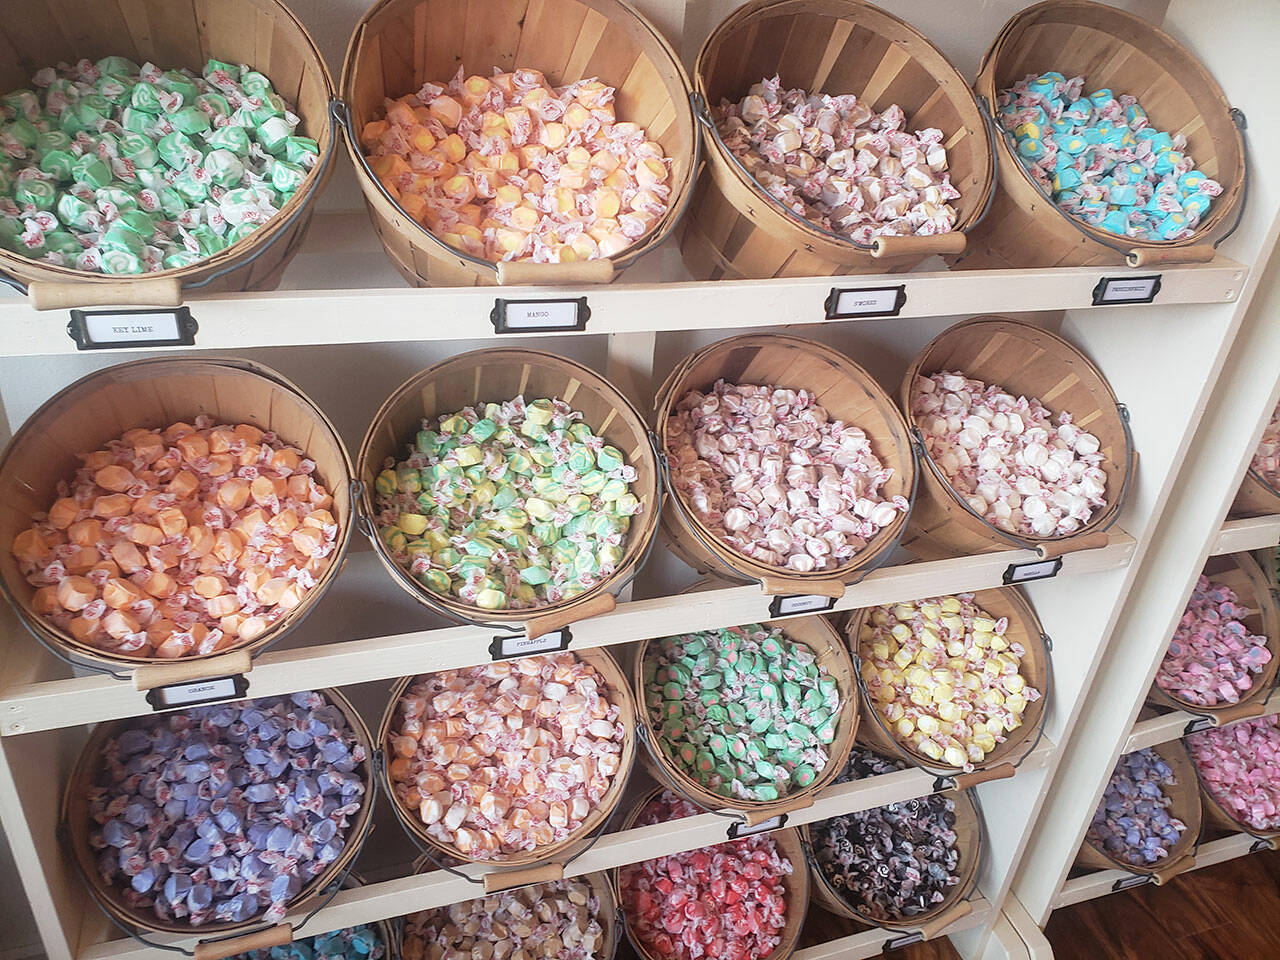 Plenty of saltwater taffy is offered at the new business.